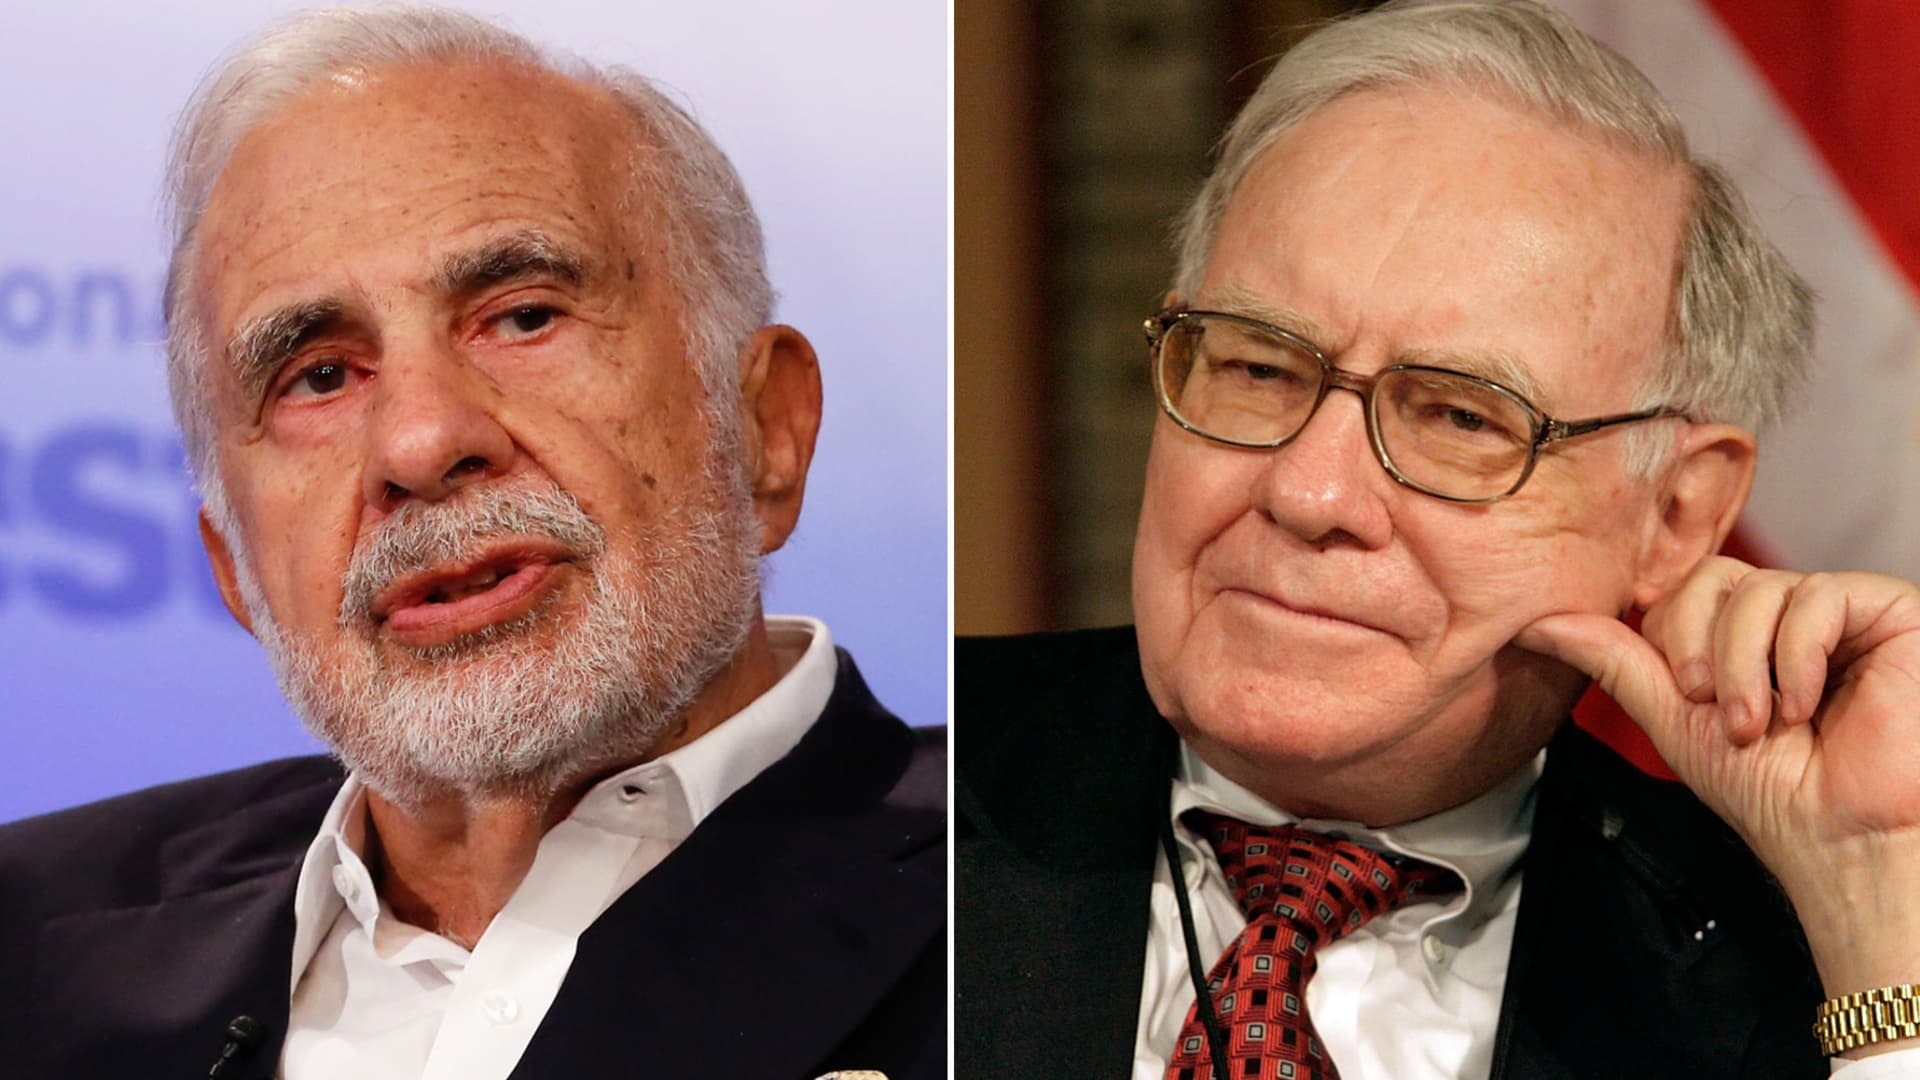 Carl Icahn on how his investment style differs from Warren Buffett’s